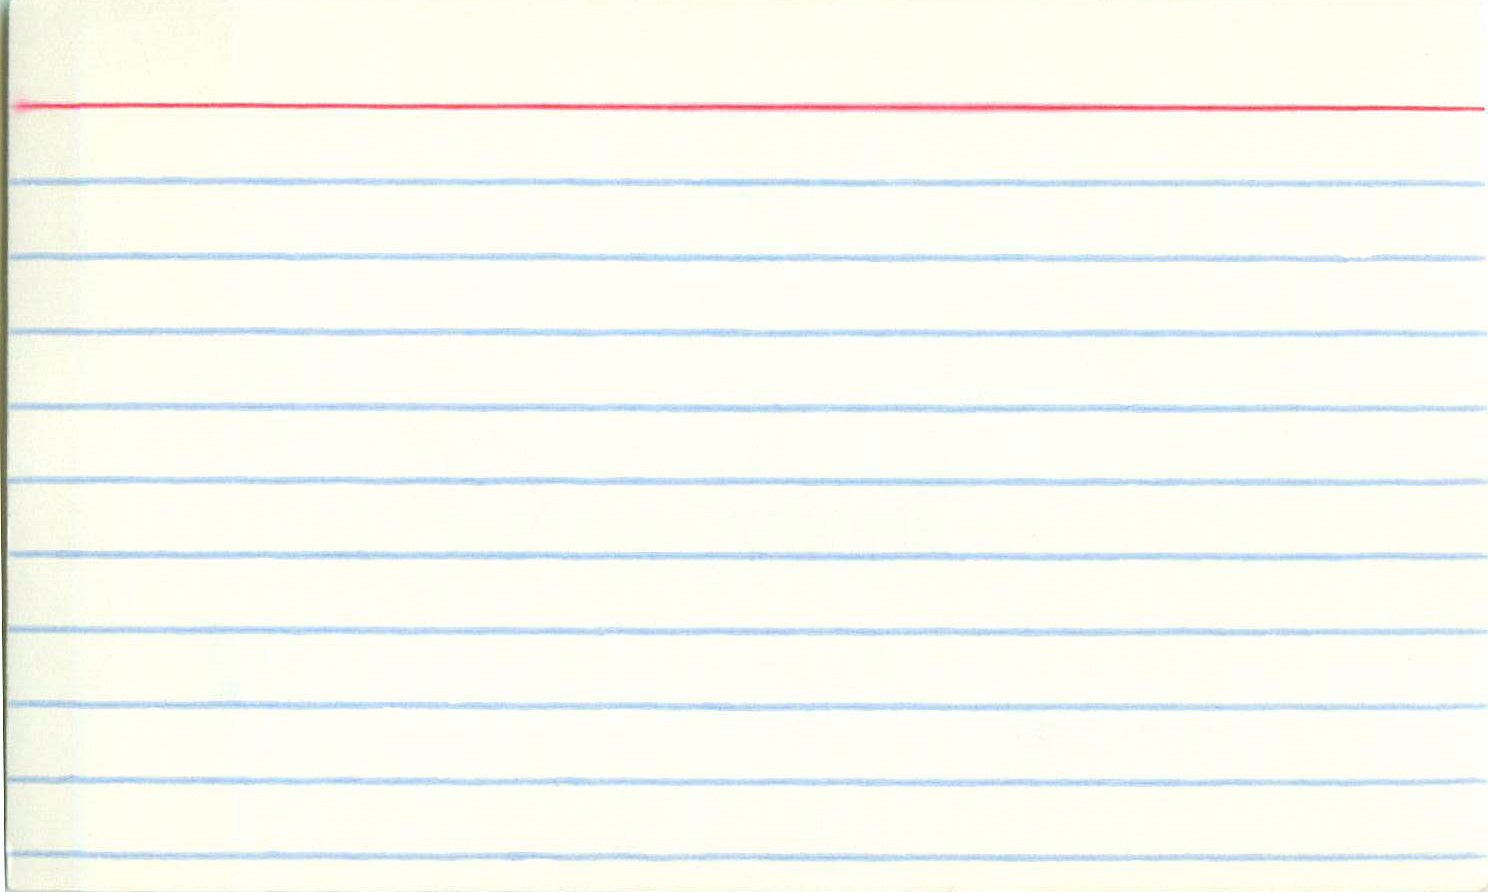 Blank index card! - StockPholio.com  Free Stock Photos Intended For Blank Index Card Template